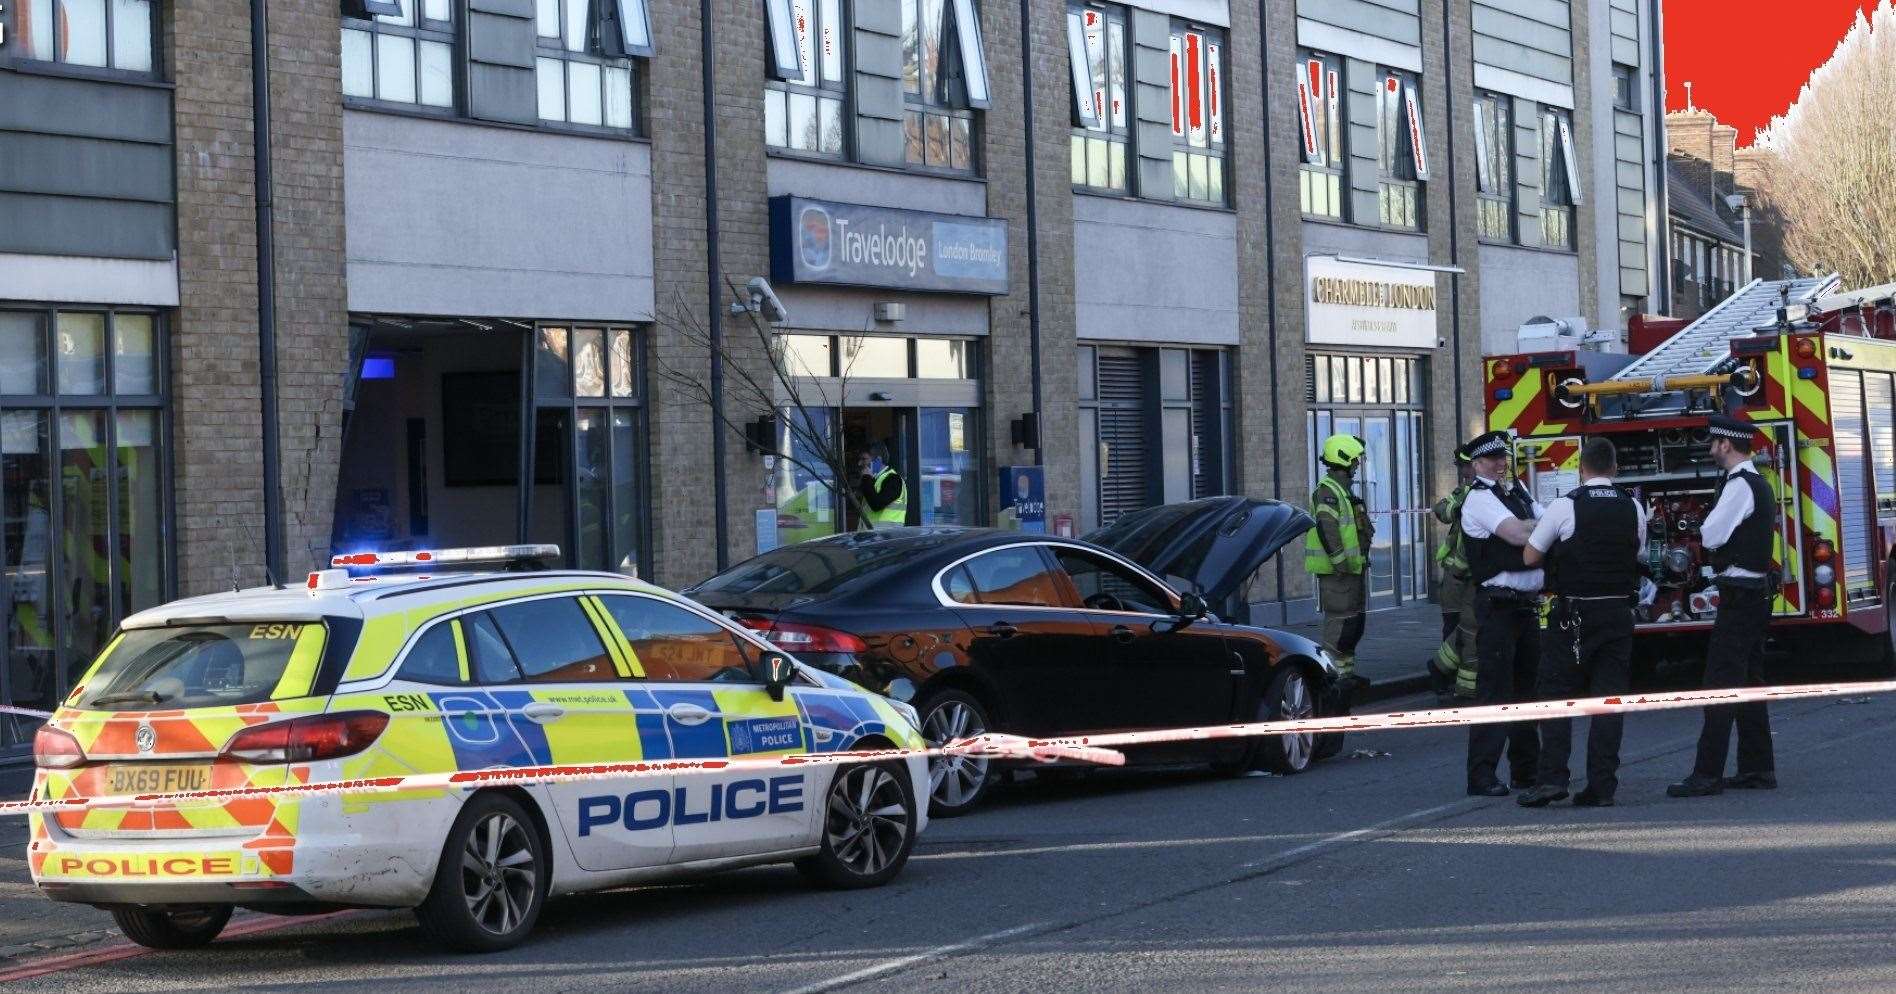 Officers attended after a car crashed into the Travelodge. Picture: UKNIP